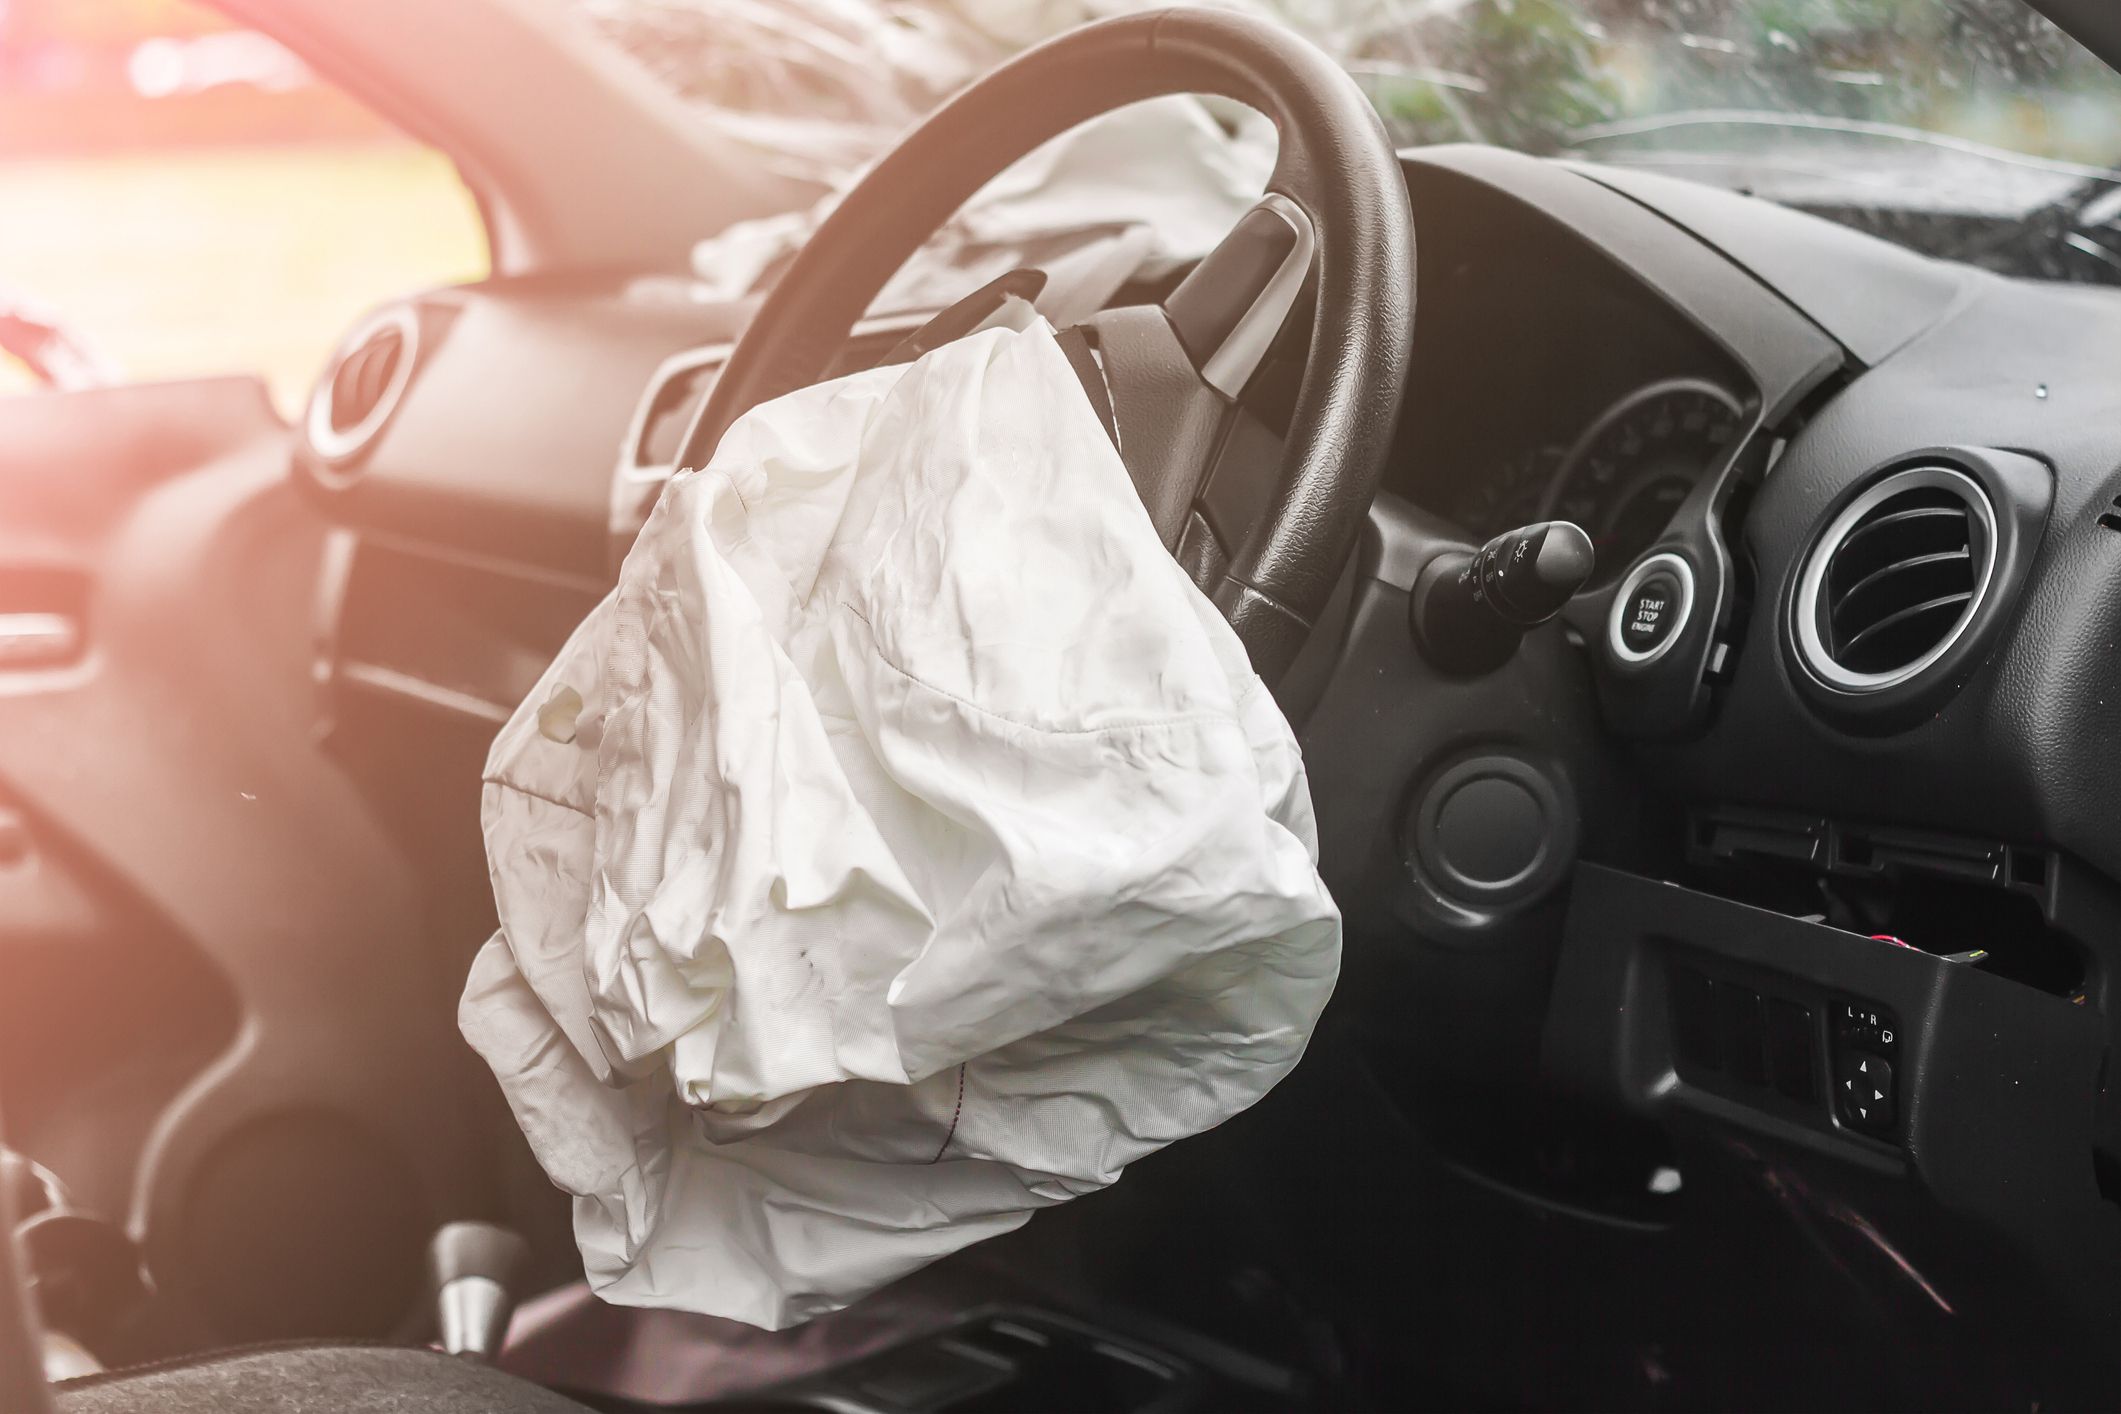 <p class="paragraph">How much? $4,000</p><p class="paragraph">Your airbags are there to protect you during an accident, and when they are deployed, they need to be replaced. If you are in an accident, insurance will cover this repair but if they go off without an accident, this cost will be on you, up to $4,000 as it could include replacing the parts that hold the airbags.</p><p class="paragraph">Save money: Wear your seat belt!</p><p class="paragraph"><b>Related: <a href="https://joywallet.com/how-to-lower-your-auto-insurance-after-an-accident/">How to Lower Your Car Insurance After an Accident: 8 Tips to Keep Premiums Low</a></b></p>